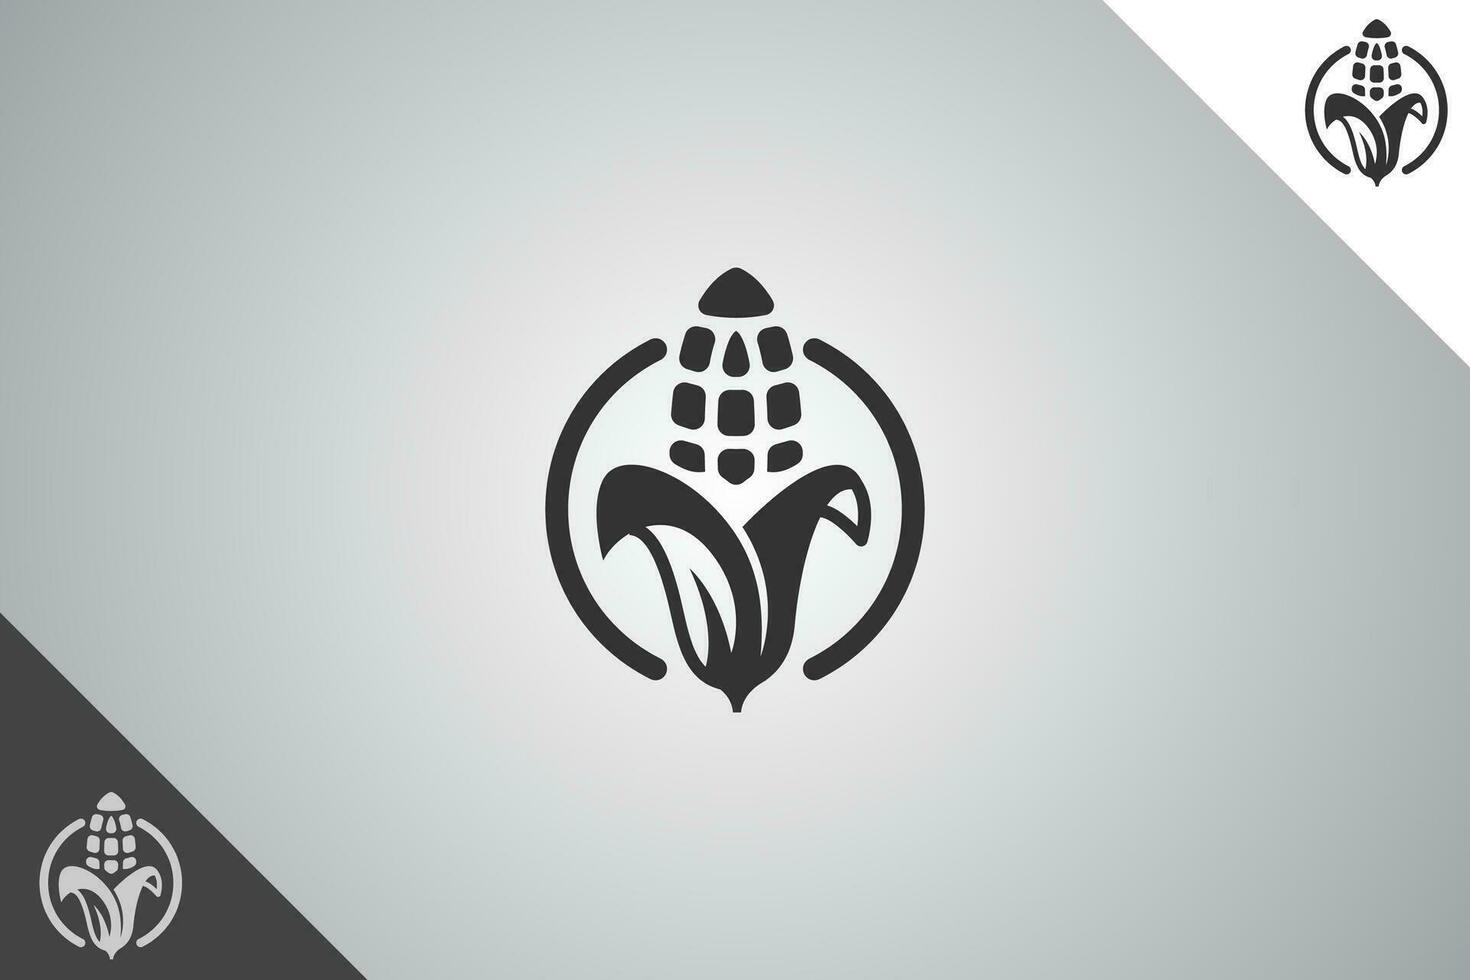 Corn logo. Minimal and modern logotype. Perfect logo for business related to agriculture industry, wheat farm, farm field, natural harvest, breeder. Isolated background. Vector eps 10.